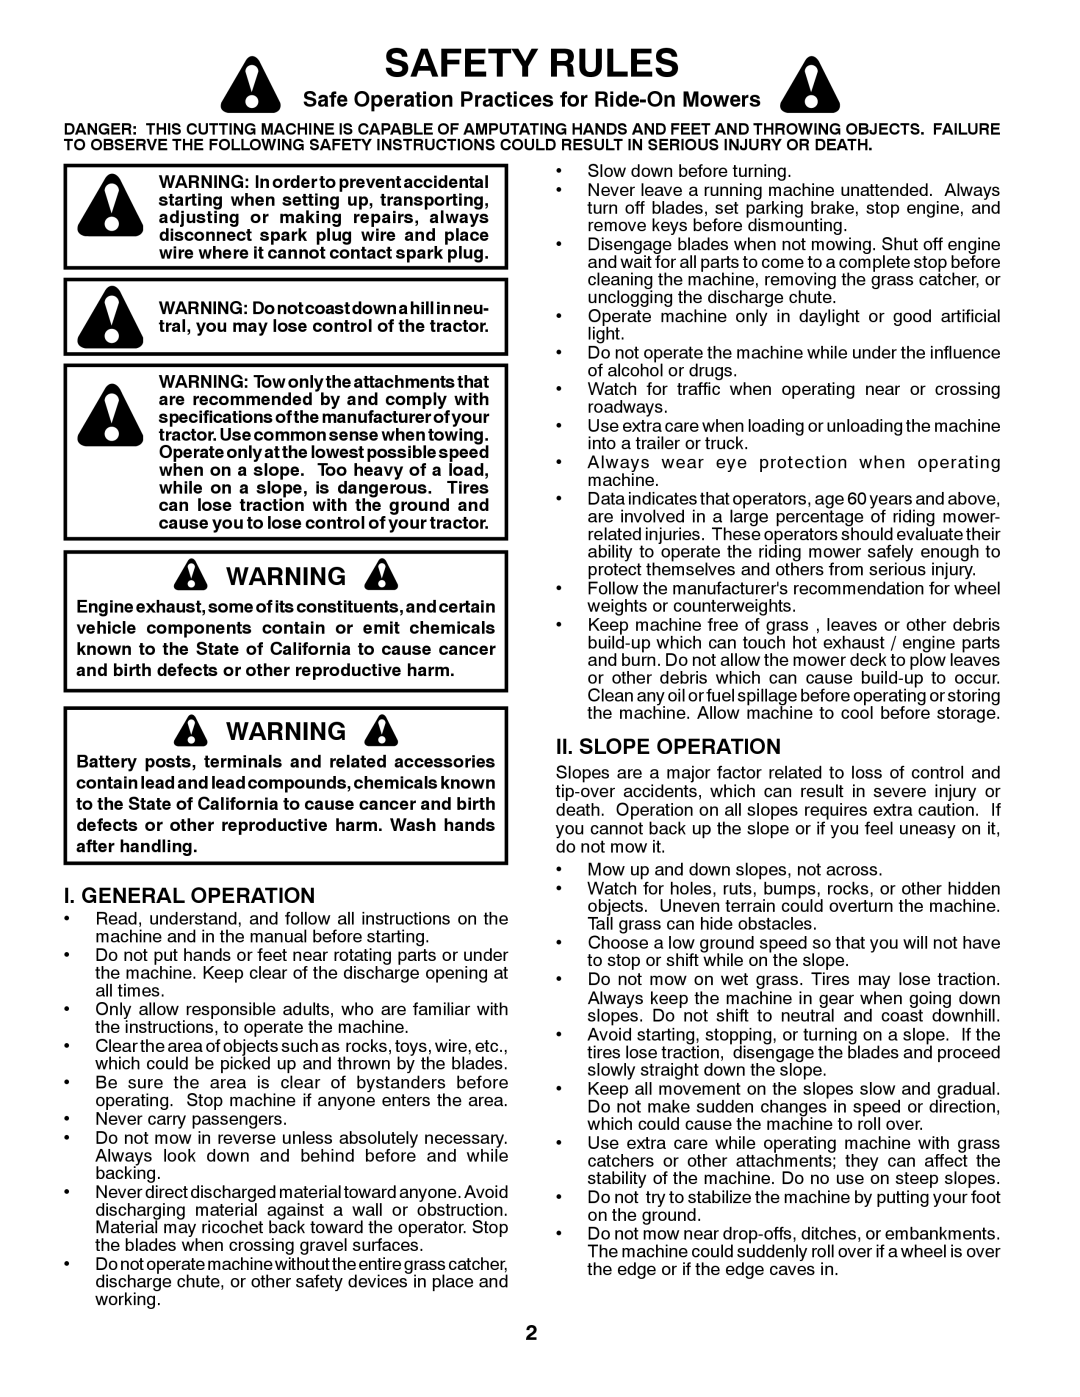 Husqvarna 96045002600 Safety Rules, Safe Operation Practices for Ride-On Mowers, I. General Operation, Ii. Slope Operation 